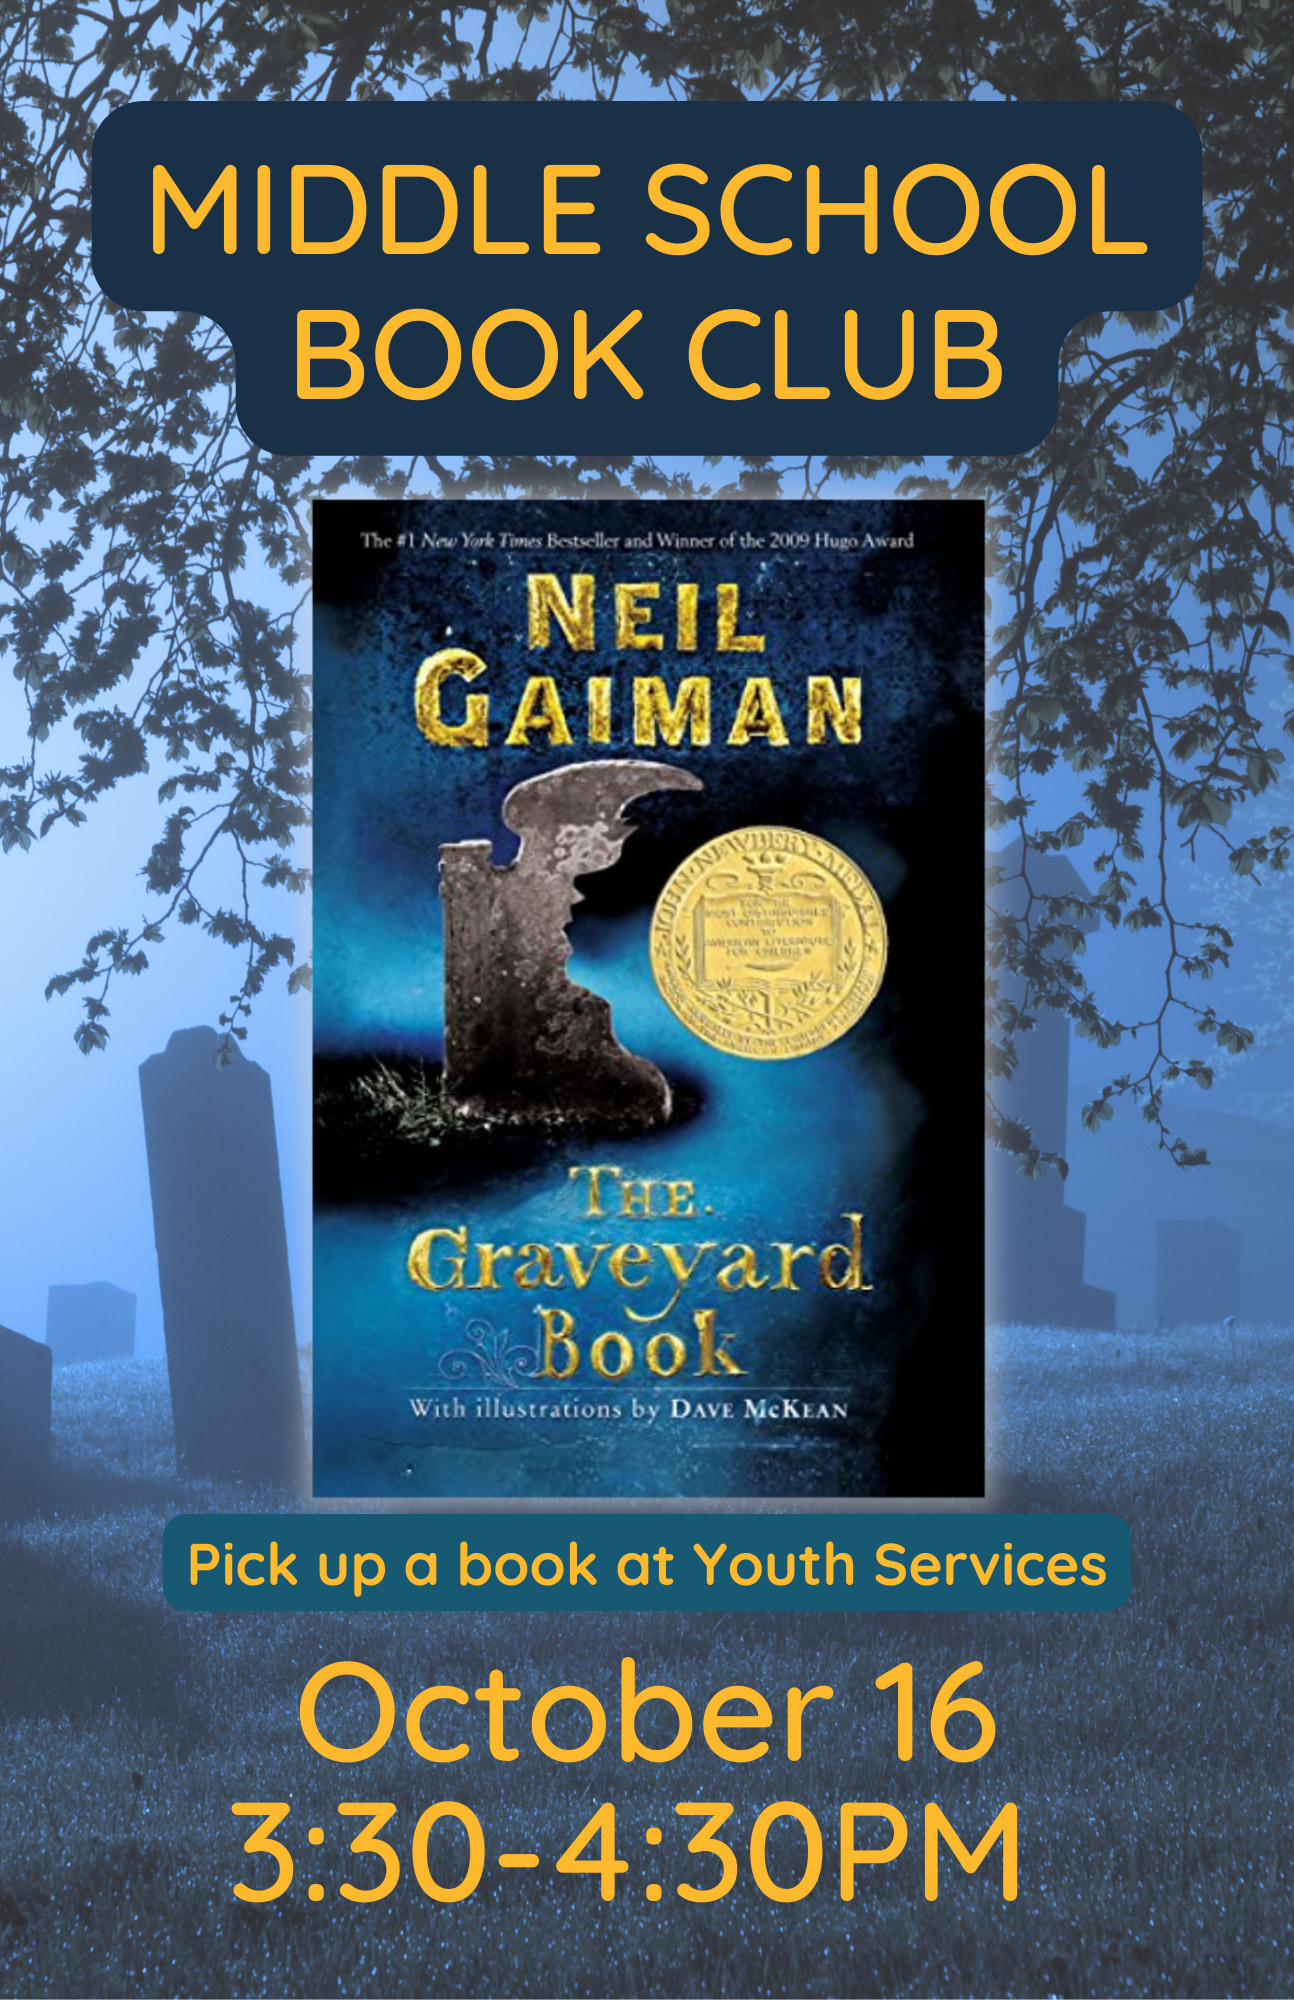 A blue, misty night scene in a graveyard as the background, with "Middle School Book Club" across the top, and "October 16, 3:30-4:30" at the bottom. In the center is the cover of the book "The Graveyard Book", which is also a blue image witha gravestone on it, with a shape like a boy's silhouette on it. Below the cover it says "Pick up a book at Youth Services."